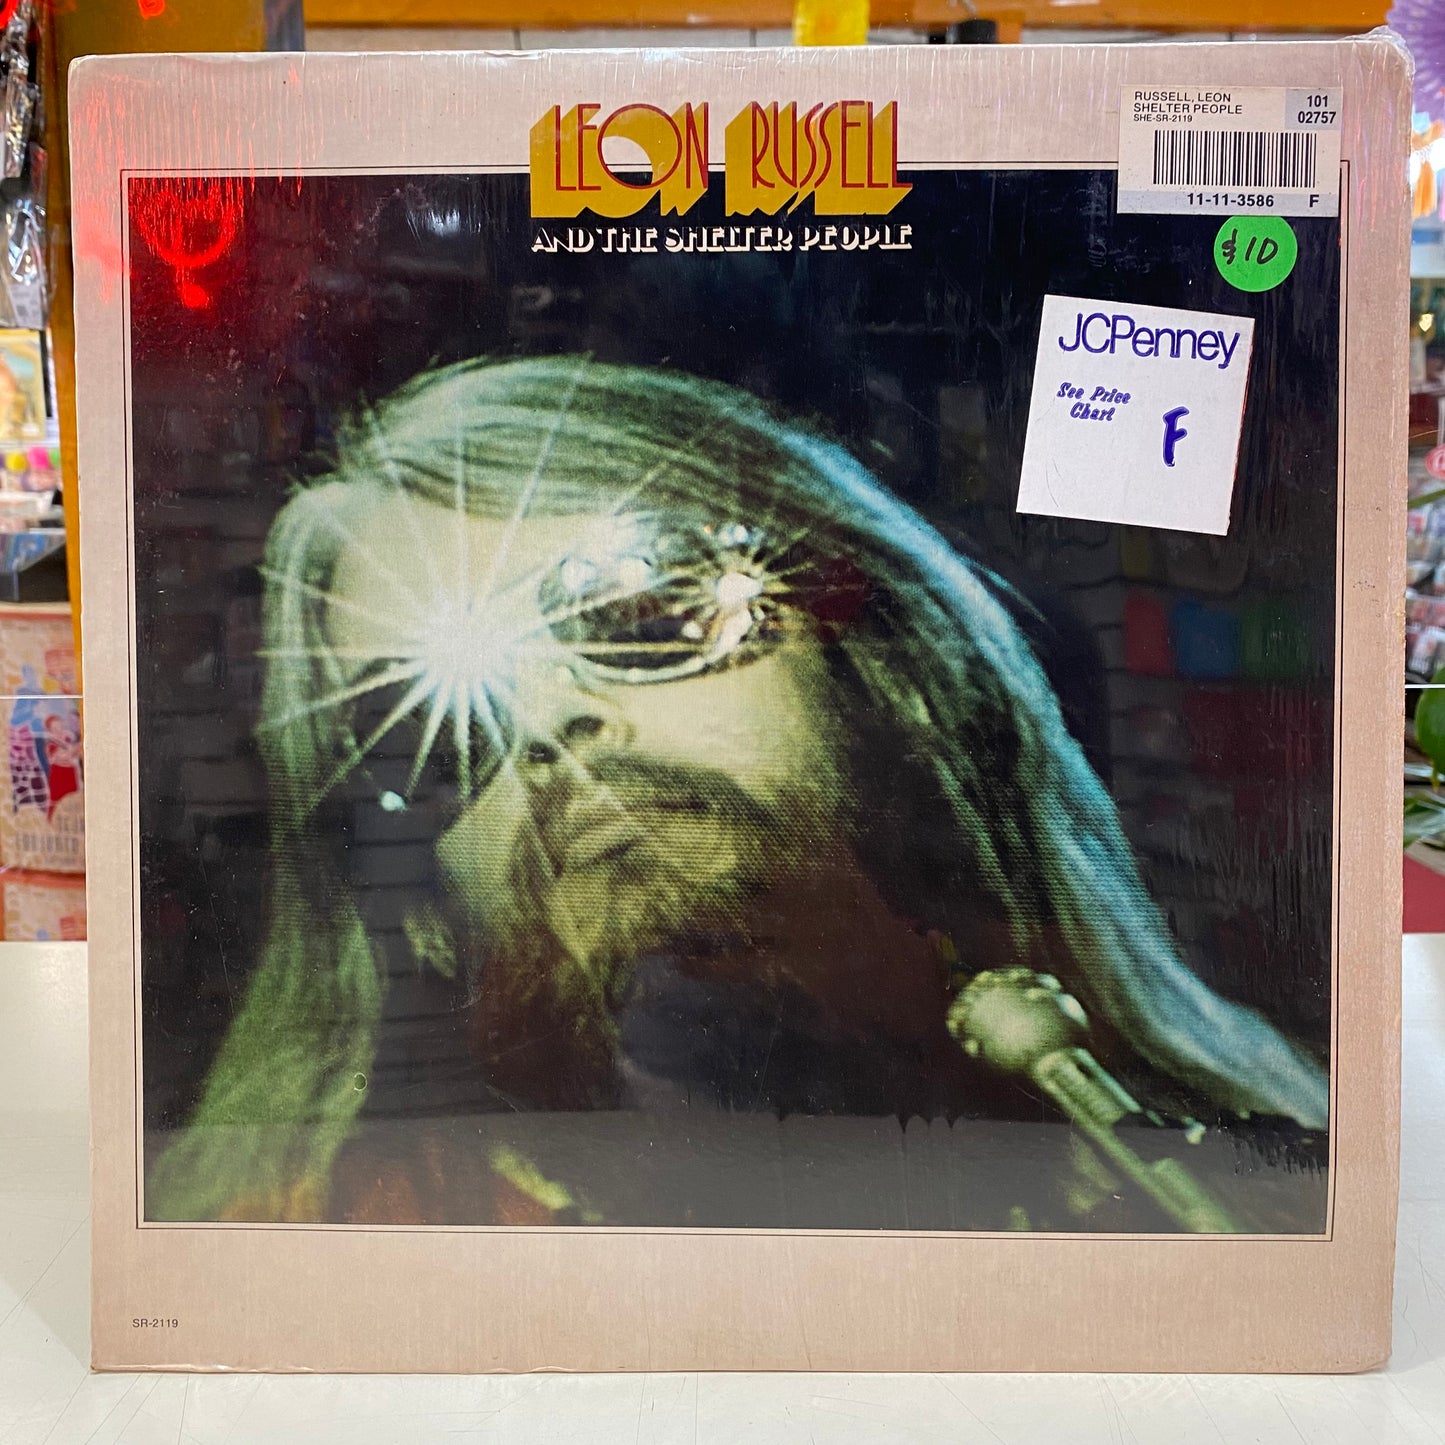 Leon Russel - Leon Russell And The Shelter People (Vinyl)